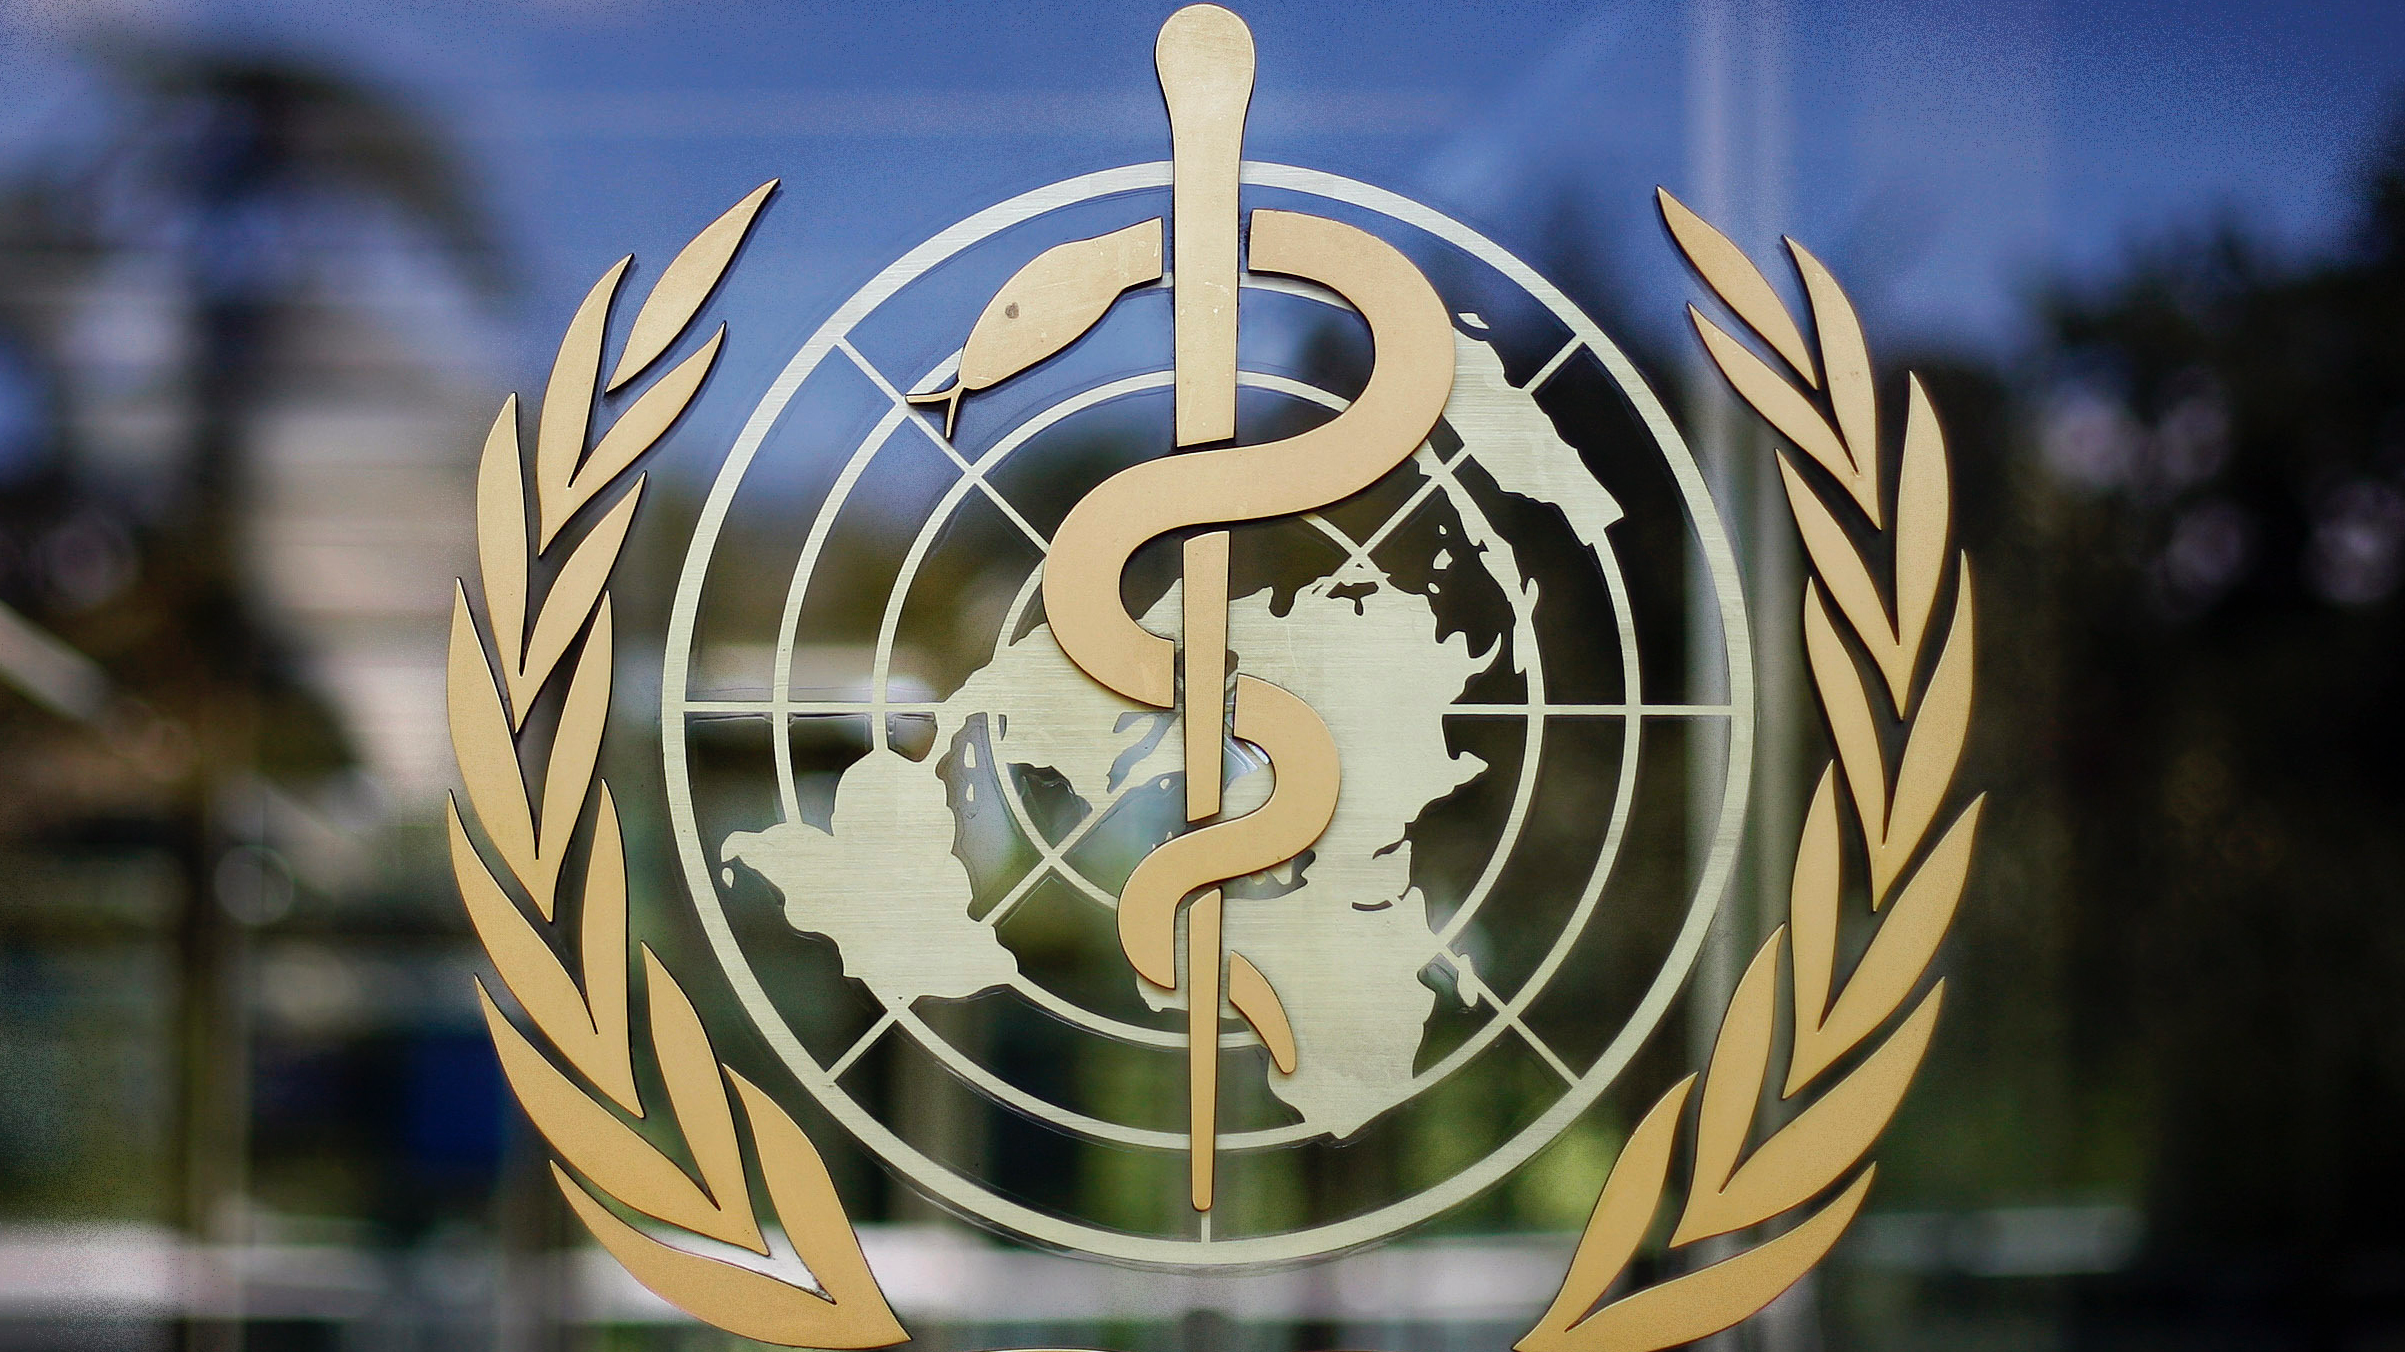 A statement issued by the WHO said that the virus was likely in a 